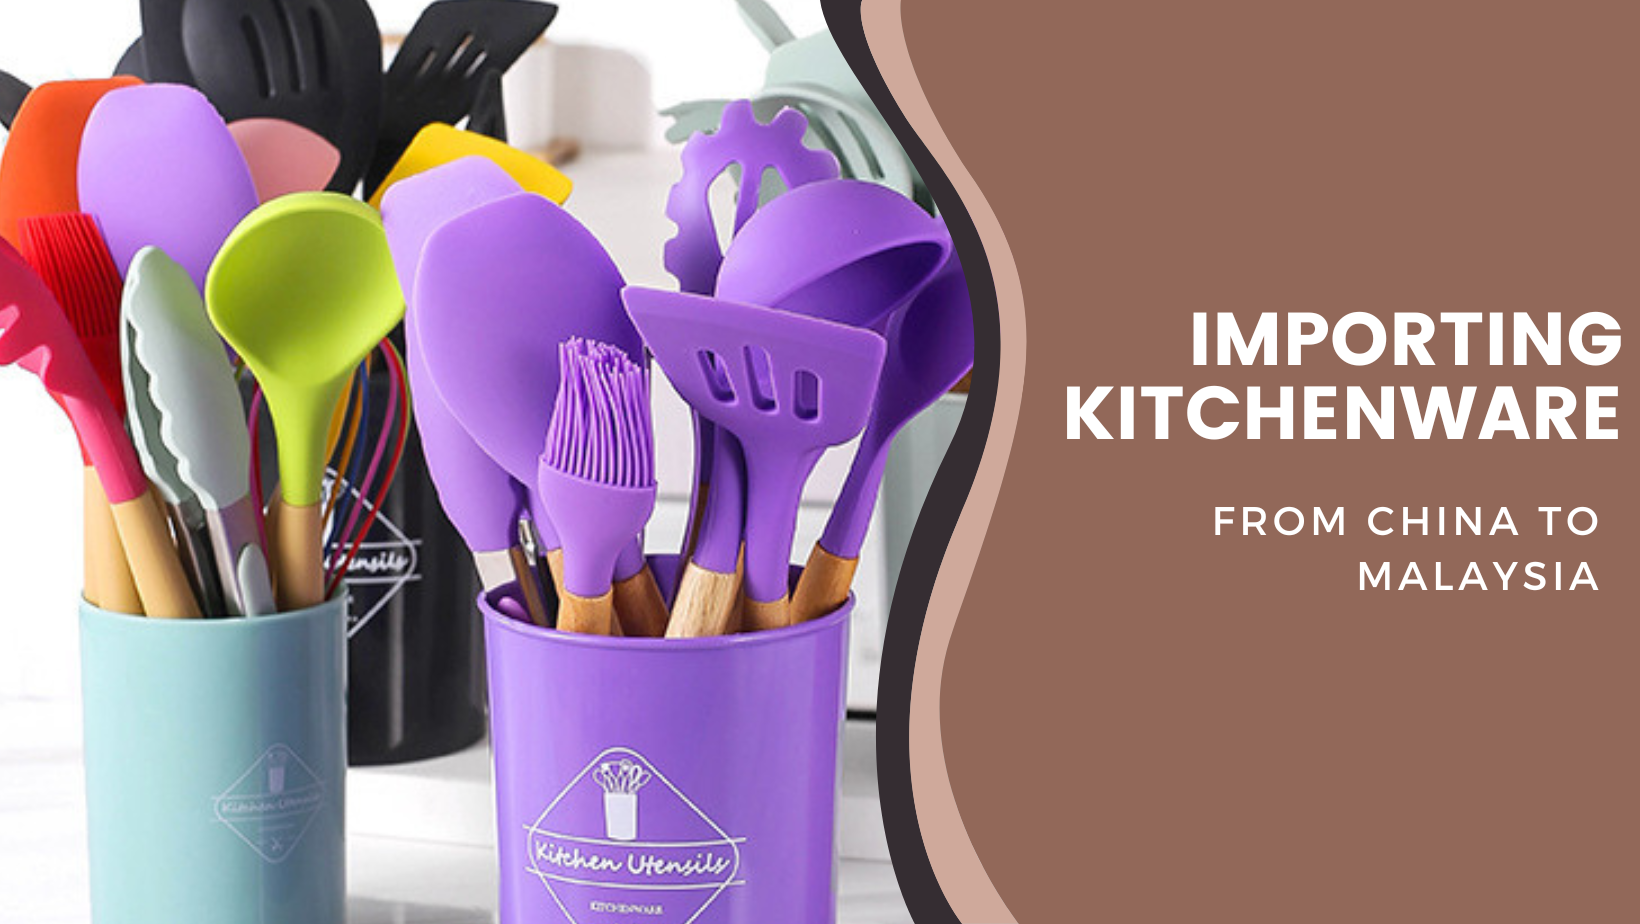 Importing Kitchenware from China